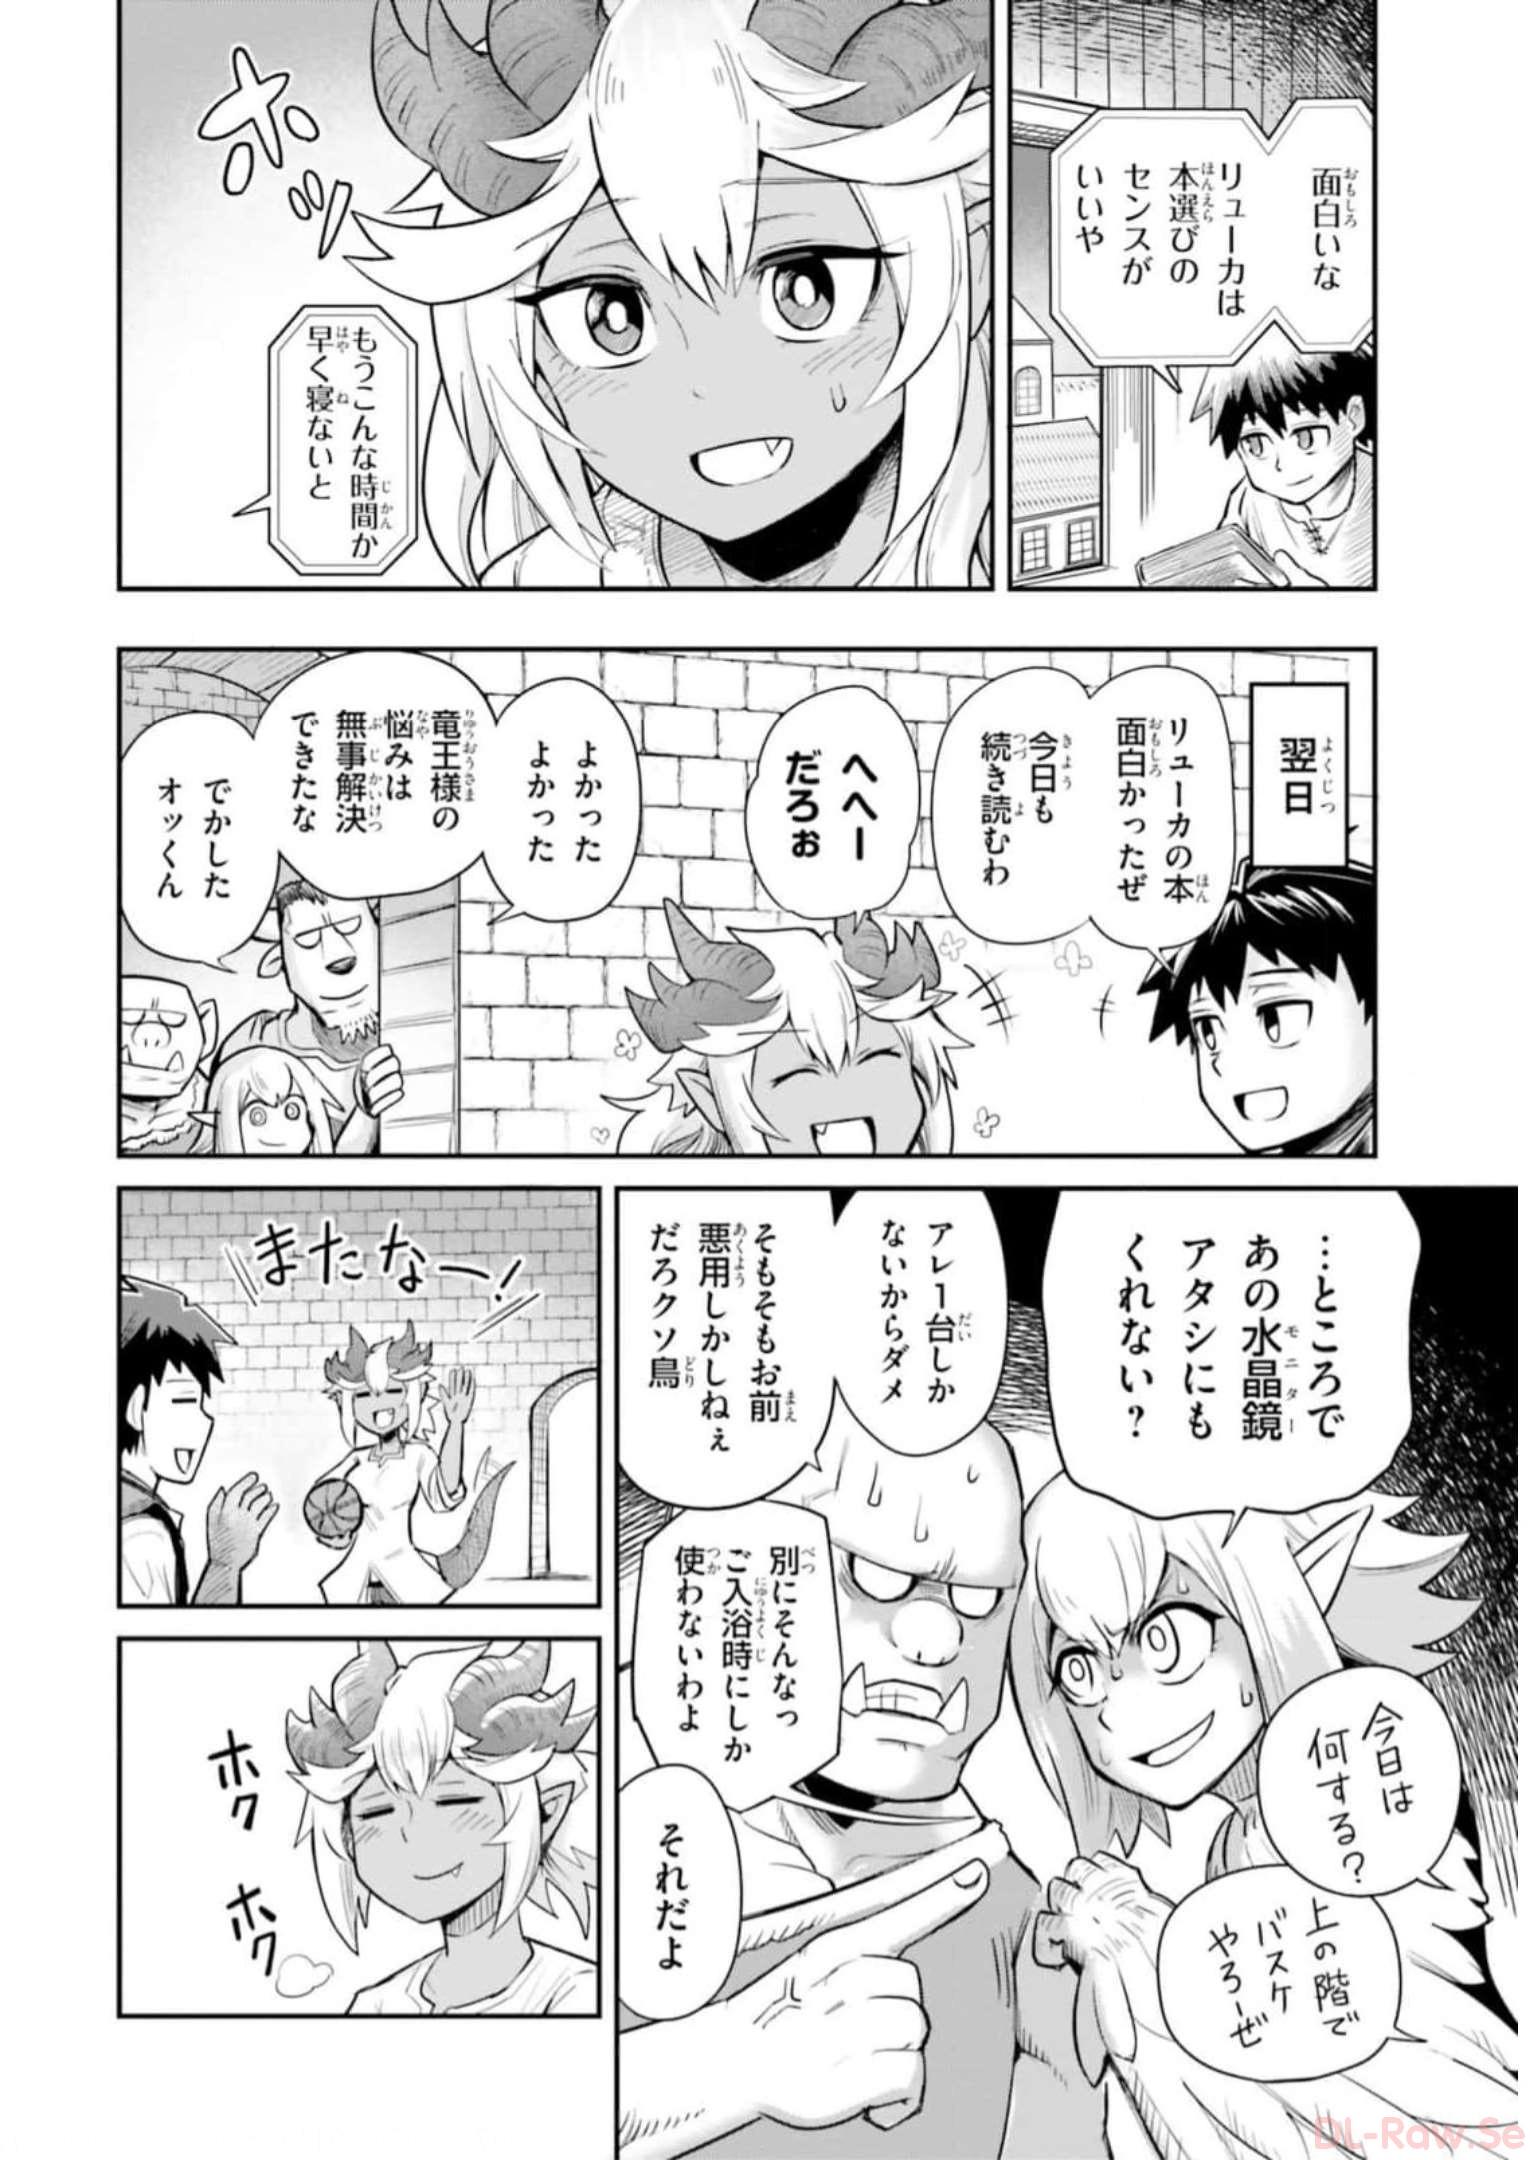 Dungeon Friends Forever Dungeon’s Childhood Friend ダンジョンの幼なじみ 第4話 - Page 6